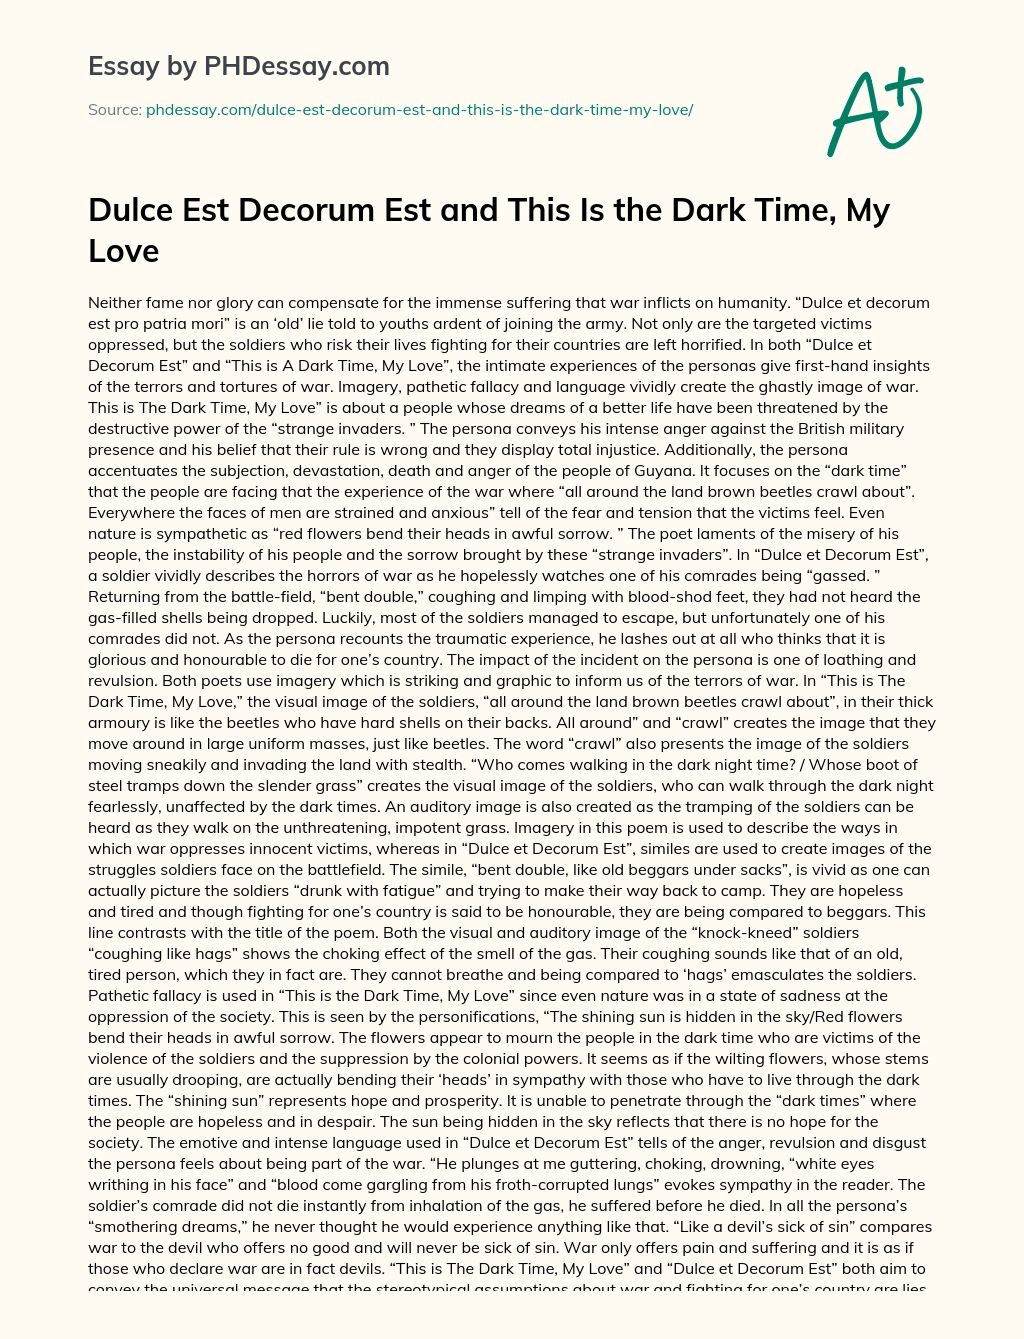 Dulce Est Decorum Est and This Is the Dark Time, My Love essay